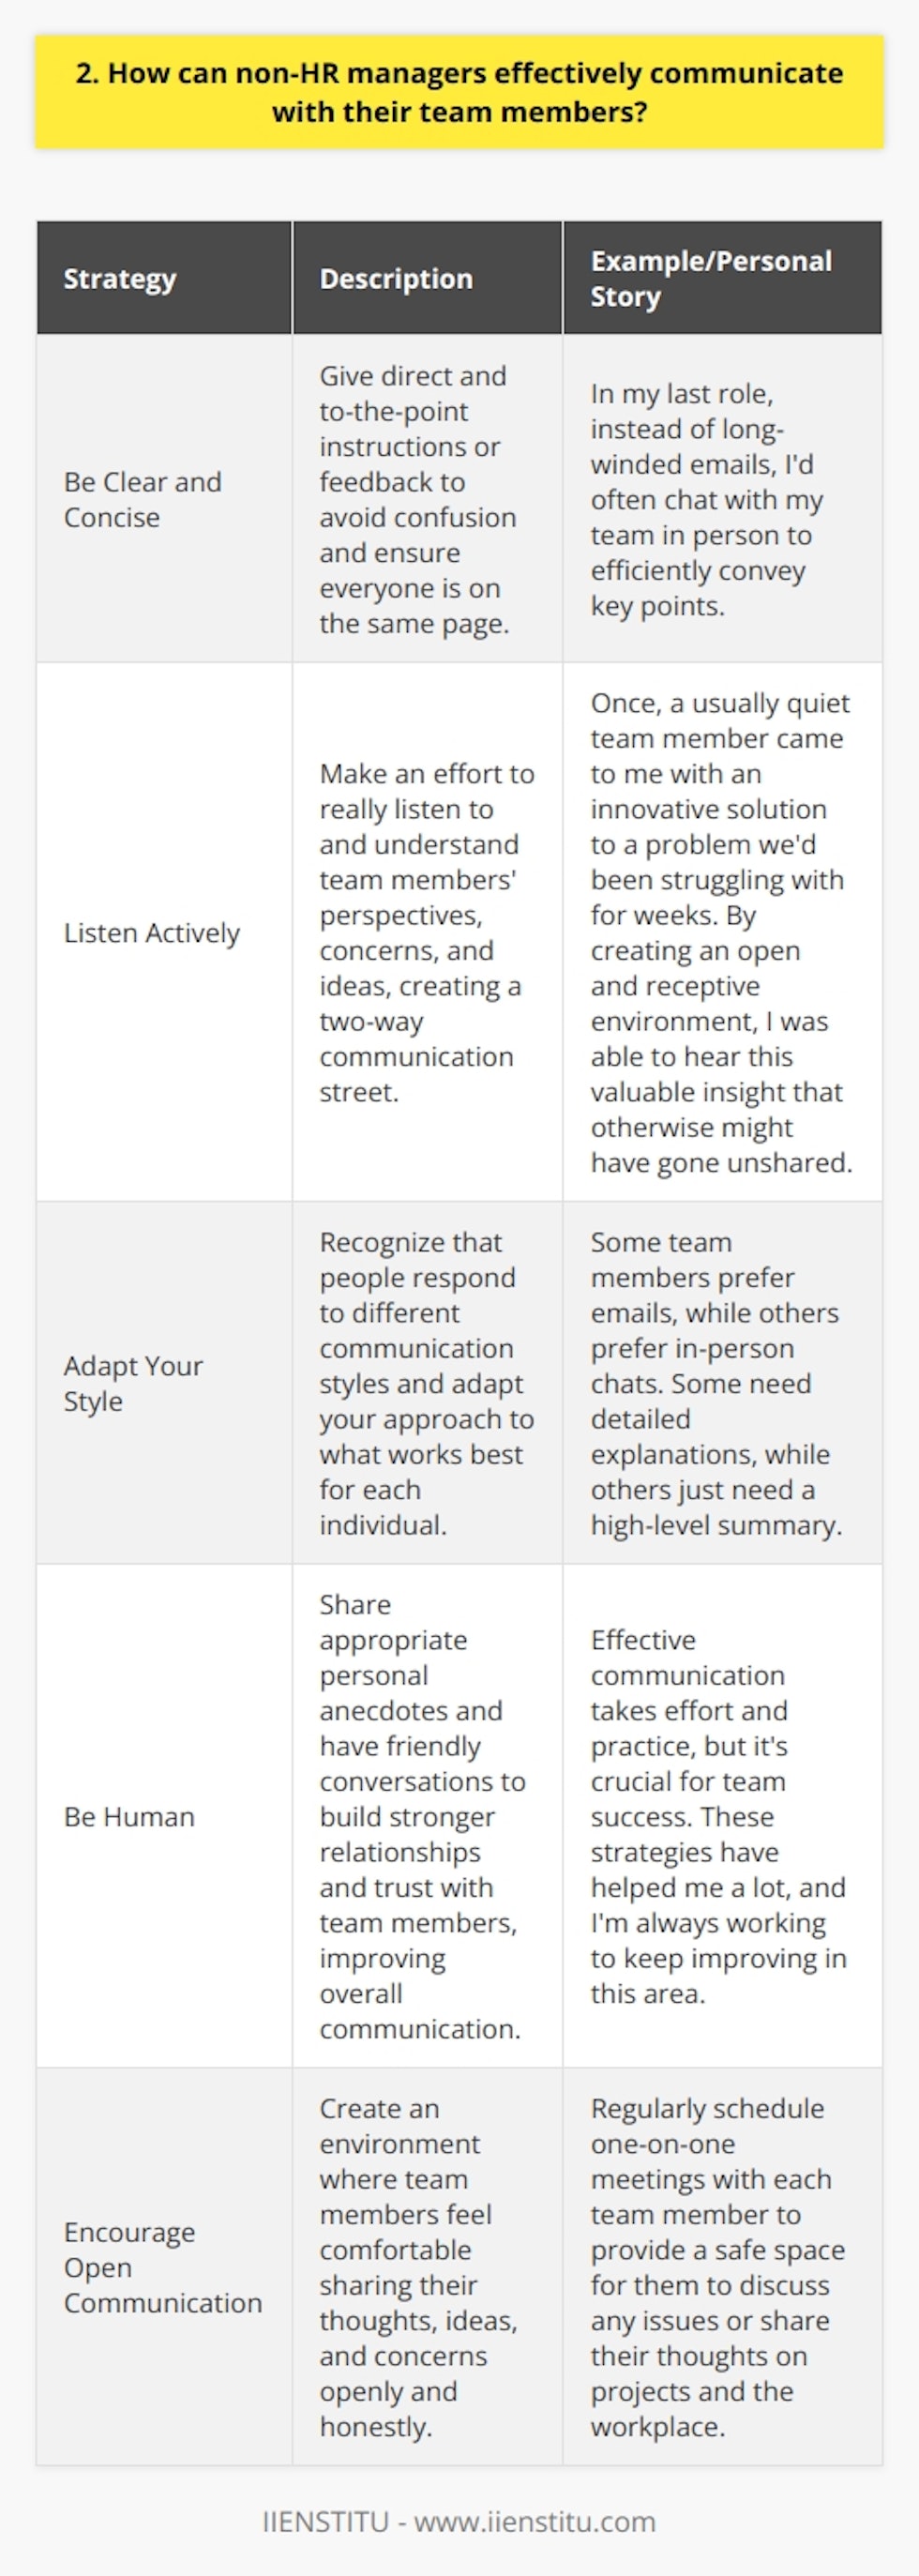 As a non-HR manager, communicating effectively with team members is crucial for success. Here are some strategies Ive found helpful: Be Clear and Concise When giving instructions or feedback, I aim to be direct and to the point. This helps avoid confusion and ensures everyone is on the same page. Example: In my last role, instead of long-winded emails, Id often chat with my team in person to efficiently convey key points. Listen Actively I believe good communication is a two-way street. I make an effort to really listen to and understand my teams perspectives, concerns, and ideas. Personal Story: Once, a usually quiet team member came to me with a innovative solution to a problem wed been struggling with for weeks. By creating an open and receptive environment, I was able to hear this valuable insight that otherwise might have gone unshared. Adapt Your Style Ive learned that people respond to different communication styles. Some prefer emails, others in-person chats. Some need detailed explanations, others just the high-level summary. I try to adapt my approach to what works best for each individual. Be Human At the end of the day, were all human. I find sharing some appropriate personal anecdotes and having friendly conversations helps build stronger relationships and trust with my team, which improves overall communication. Effective communication takes effort and practice, but its so crucial for team success. These strategies have helped me a lot, and Im always working to keep improving in this area.